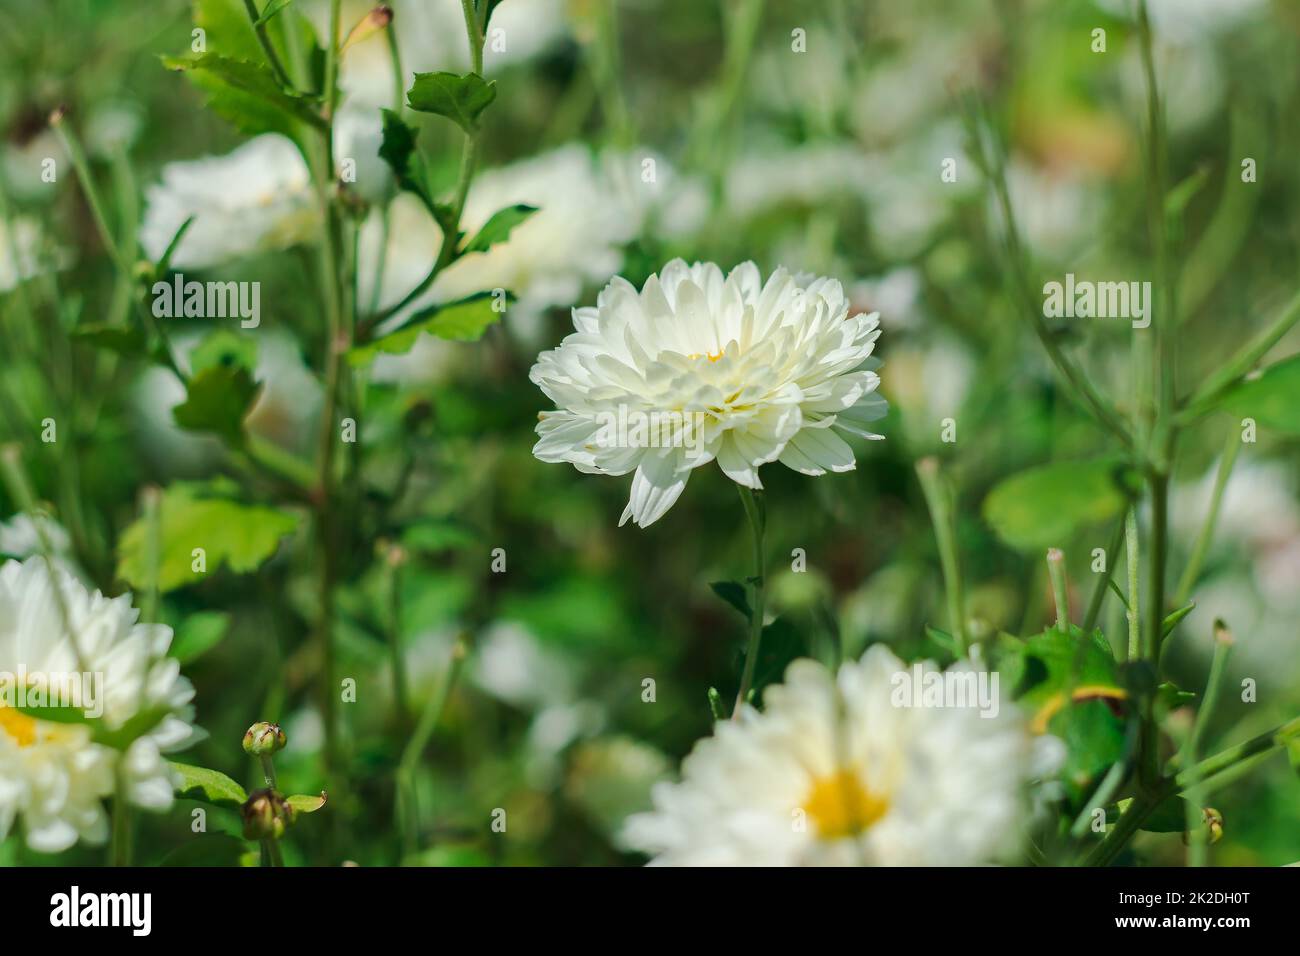 White flower fields, Dendranthema morifolium, cultivated in the highlands of Thailand For sale as fresh and dried flowers Stock Photo